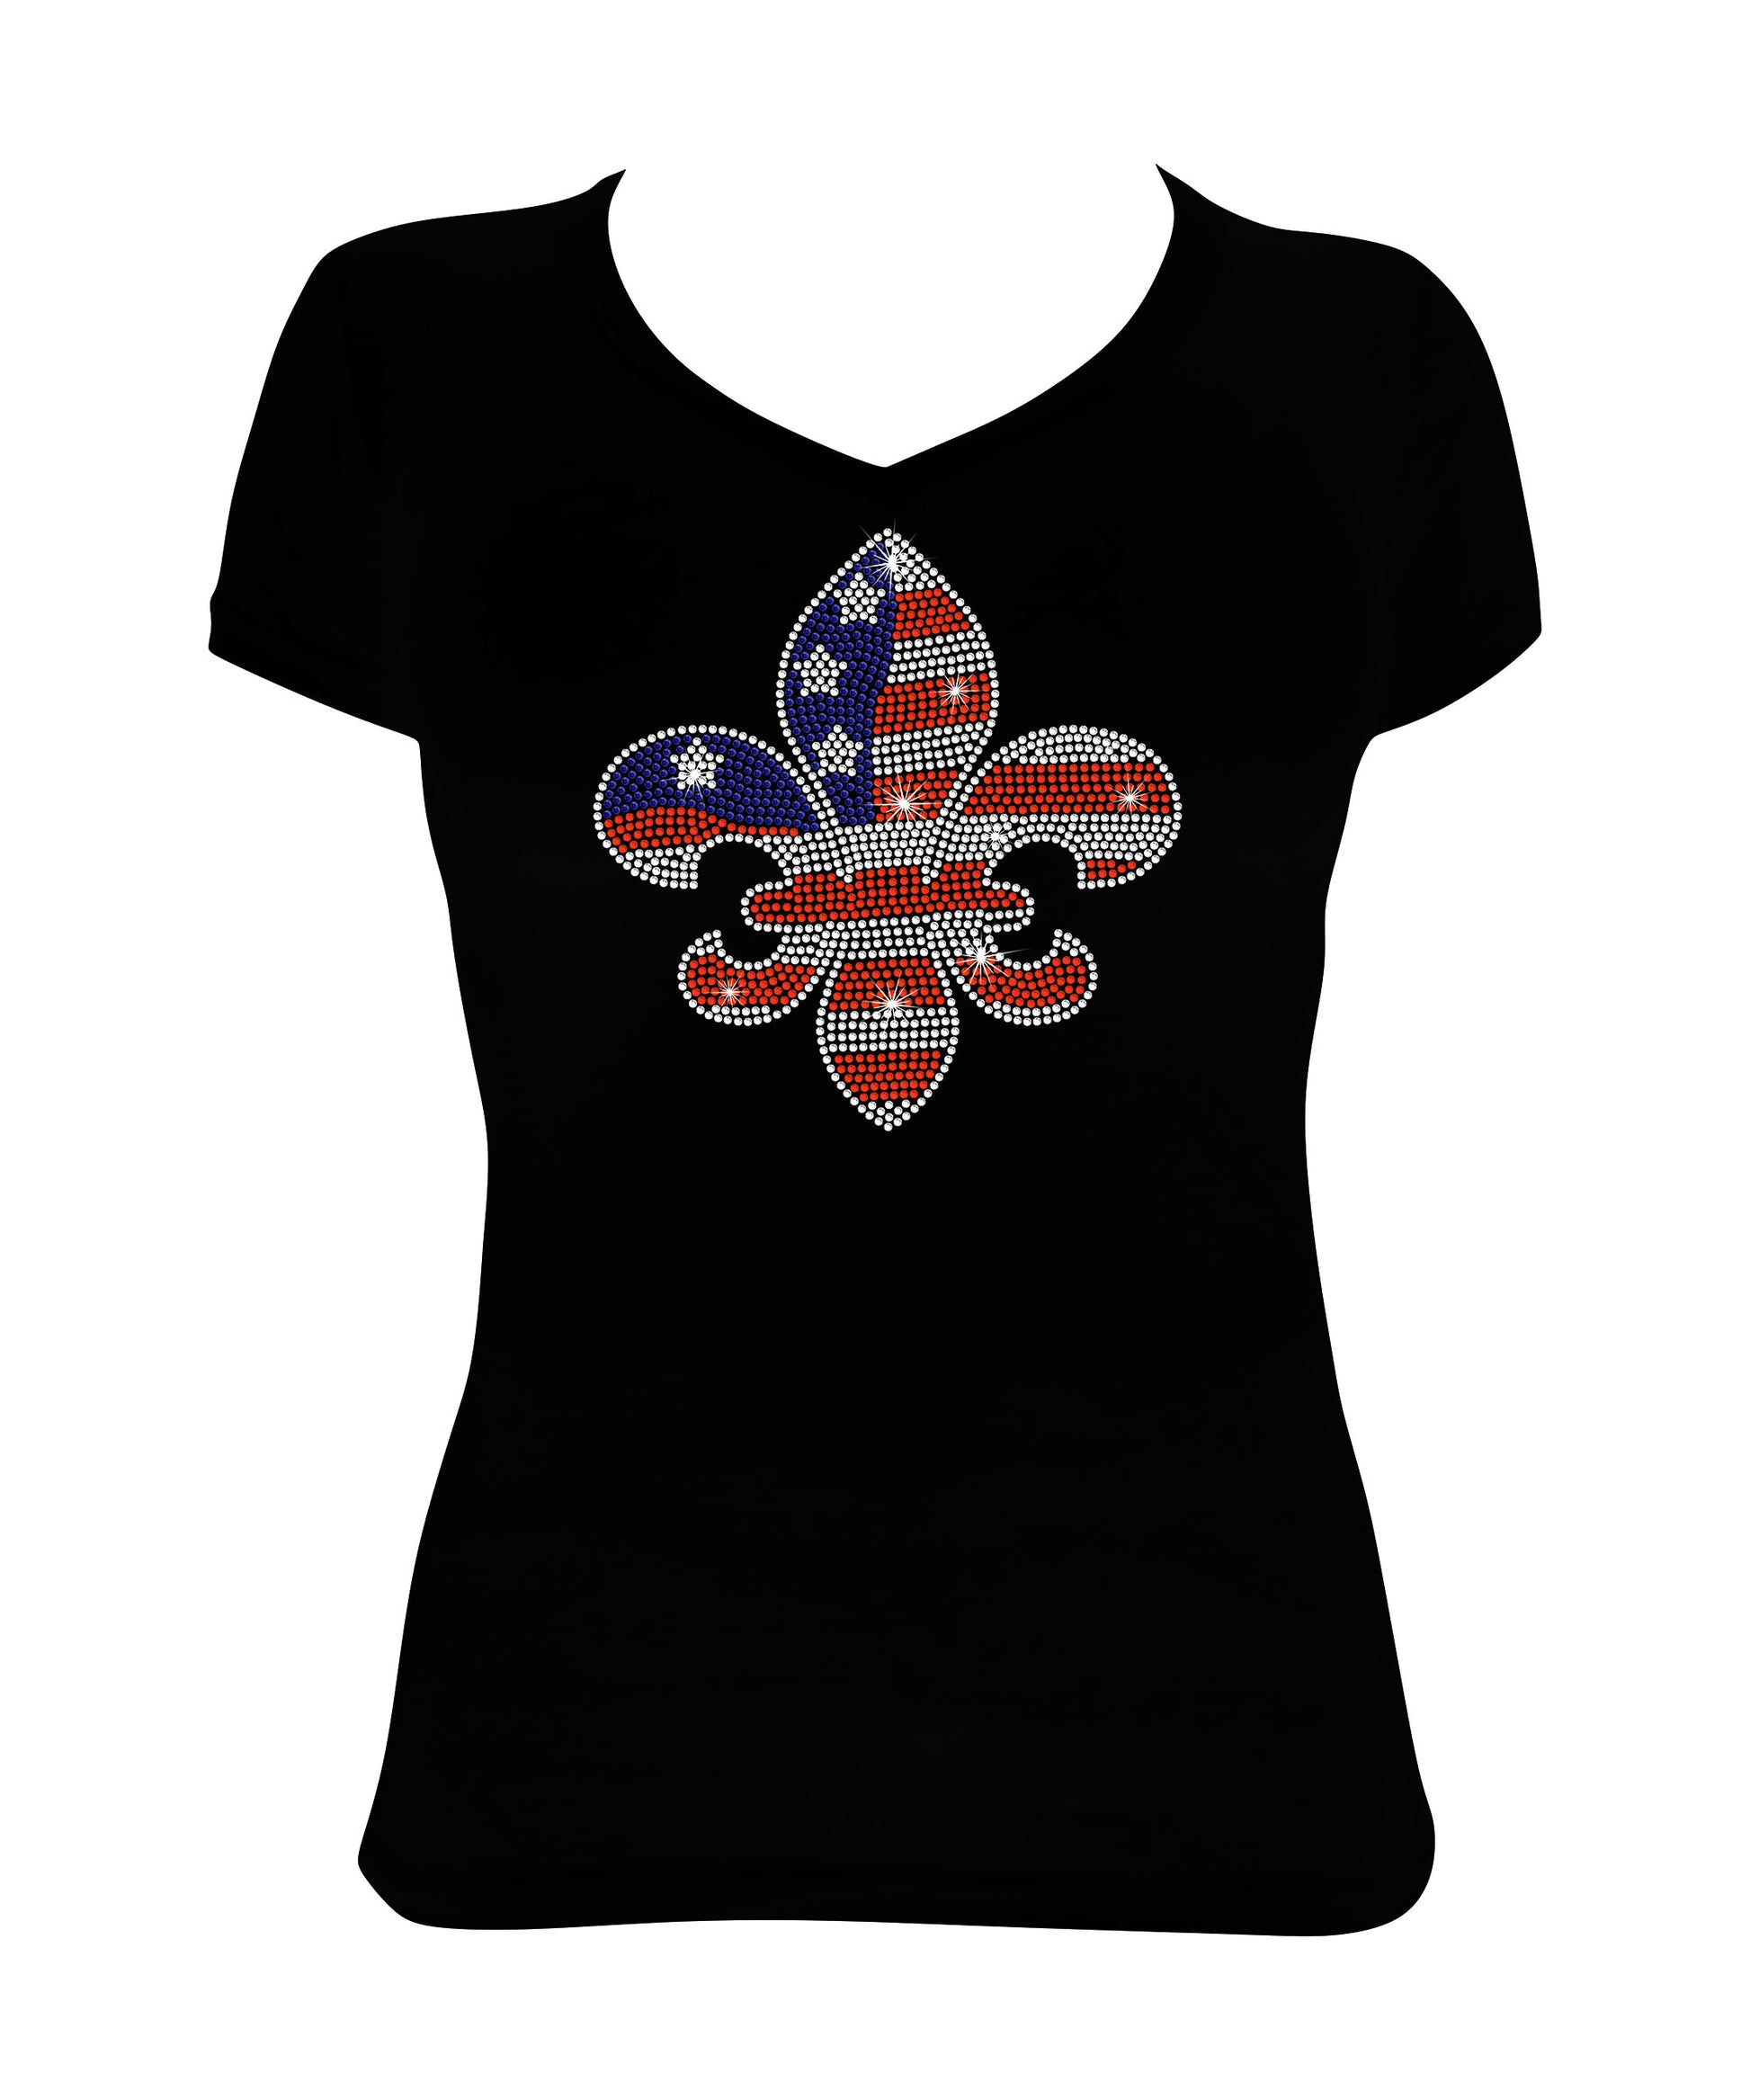 4th of July - Fleur de Lis in Red, White & Blue, Patriotic Shirt, 4th of July Shirt